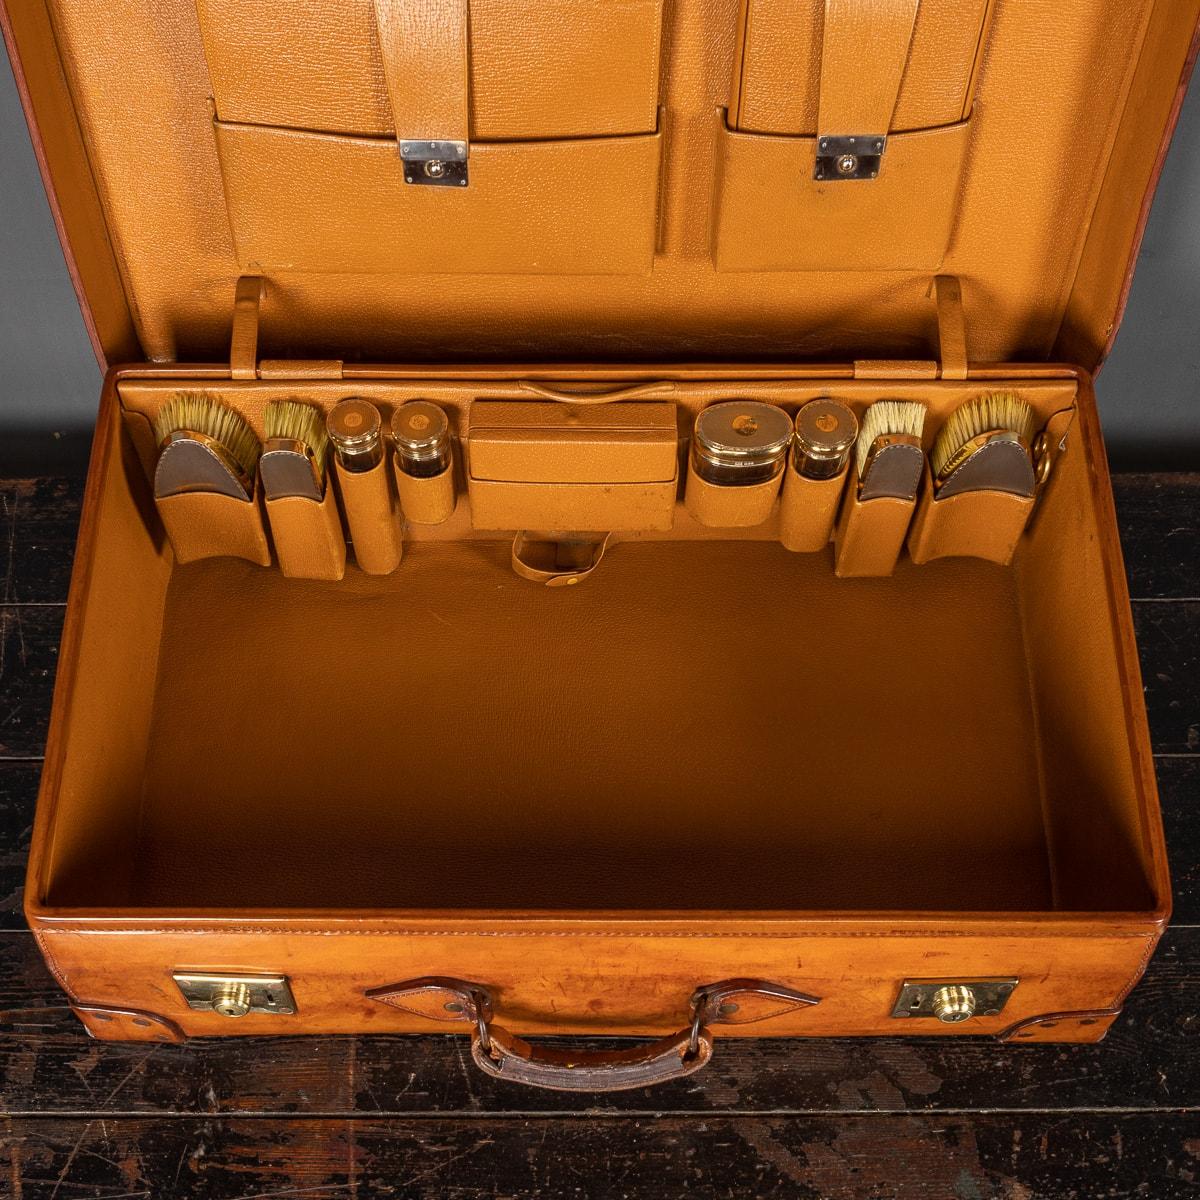 An Edwardian Dressing Case With Silver Accessories By Walker & Hall c.1928 For Sale 3